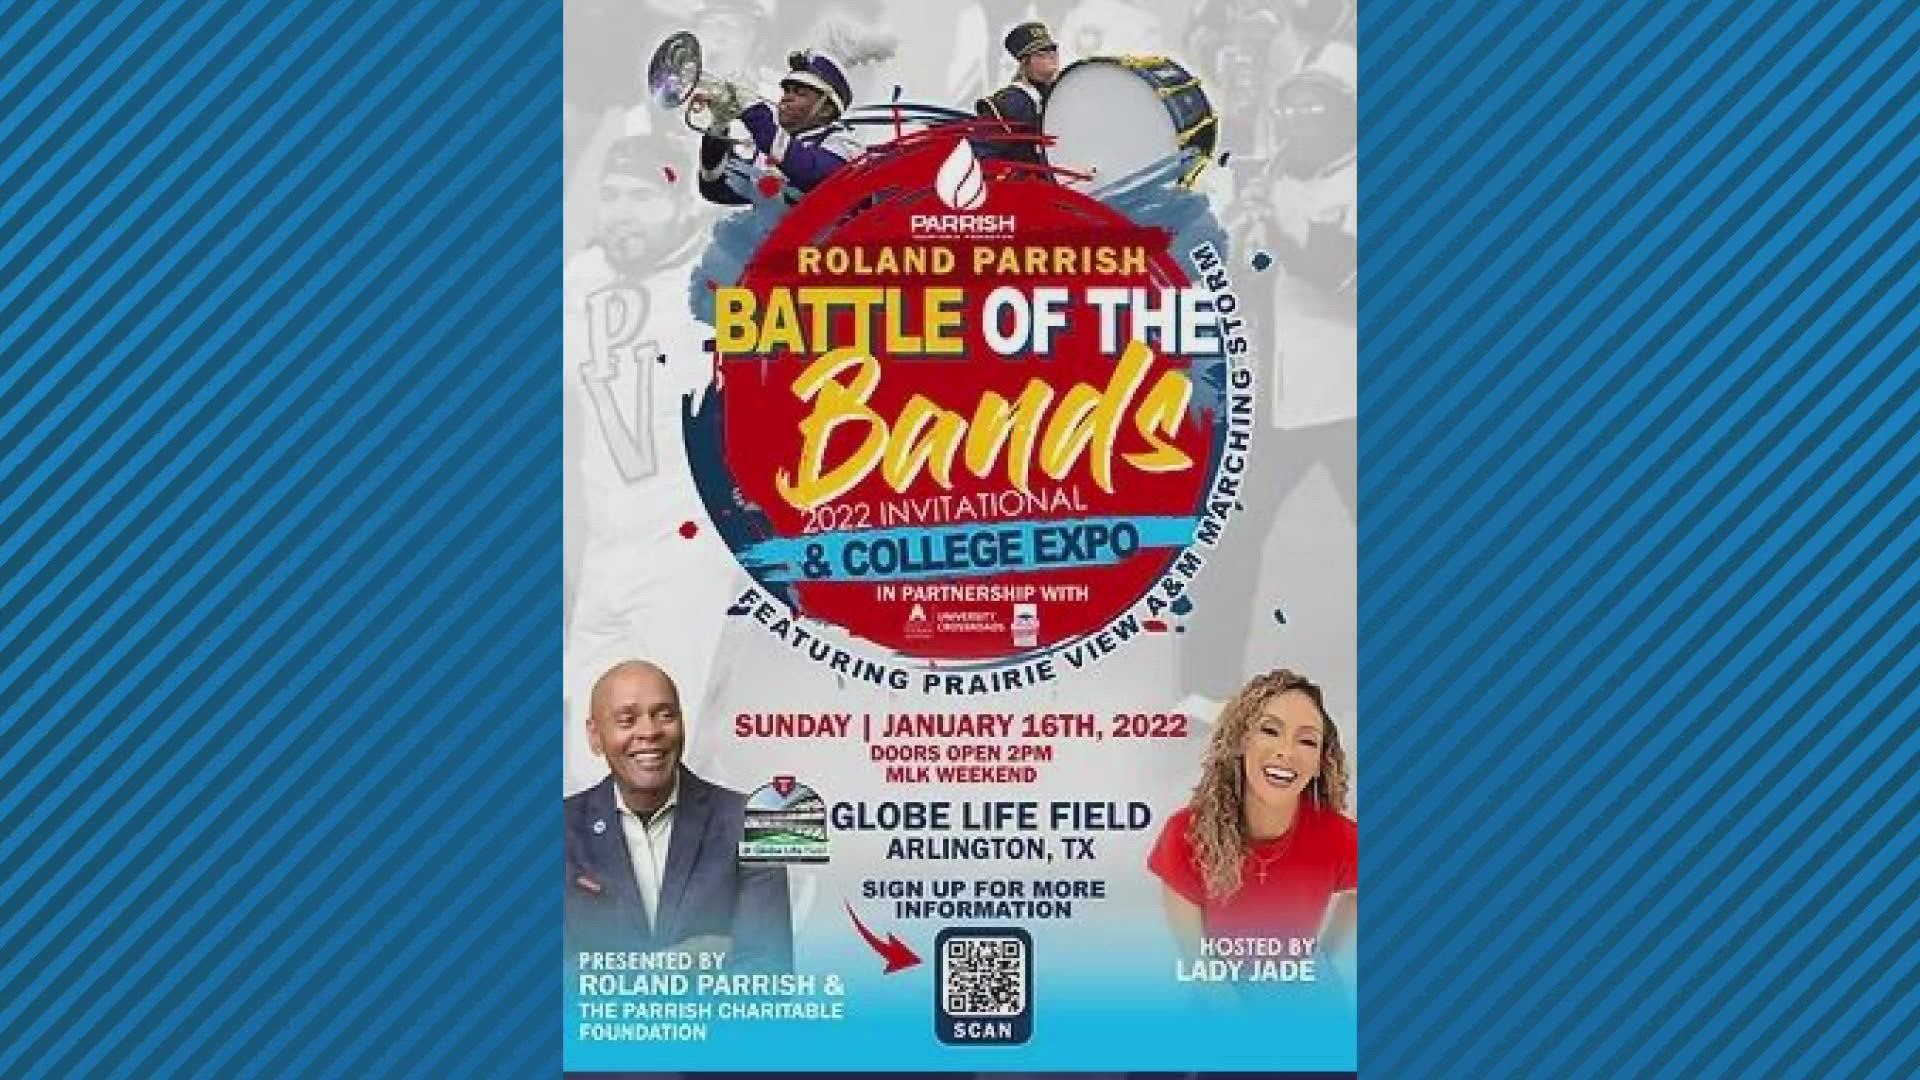 Roland Parrish presents the 2022 Battle of the High School Bands and College Expo. Tickets: www.parrishbattleofthebands.com